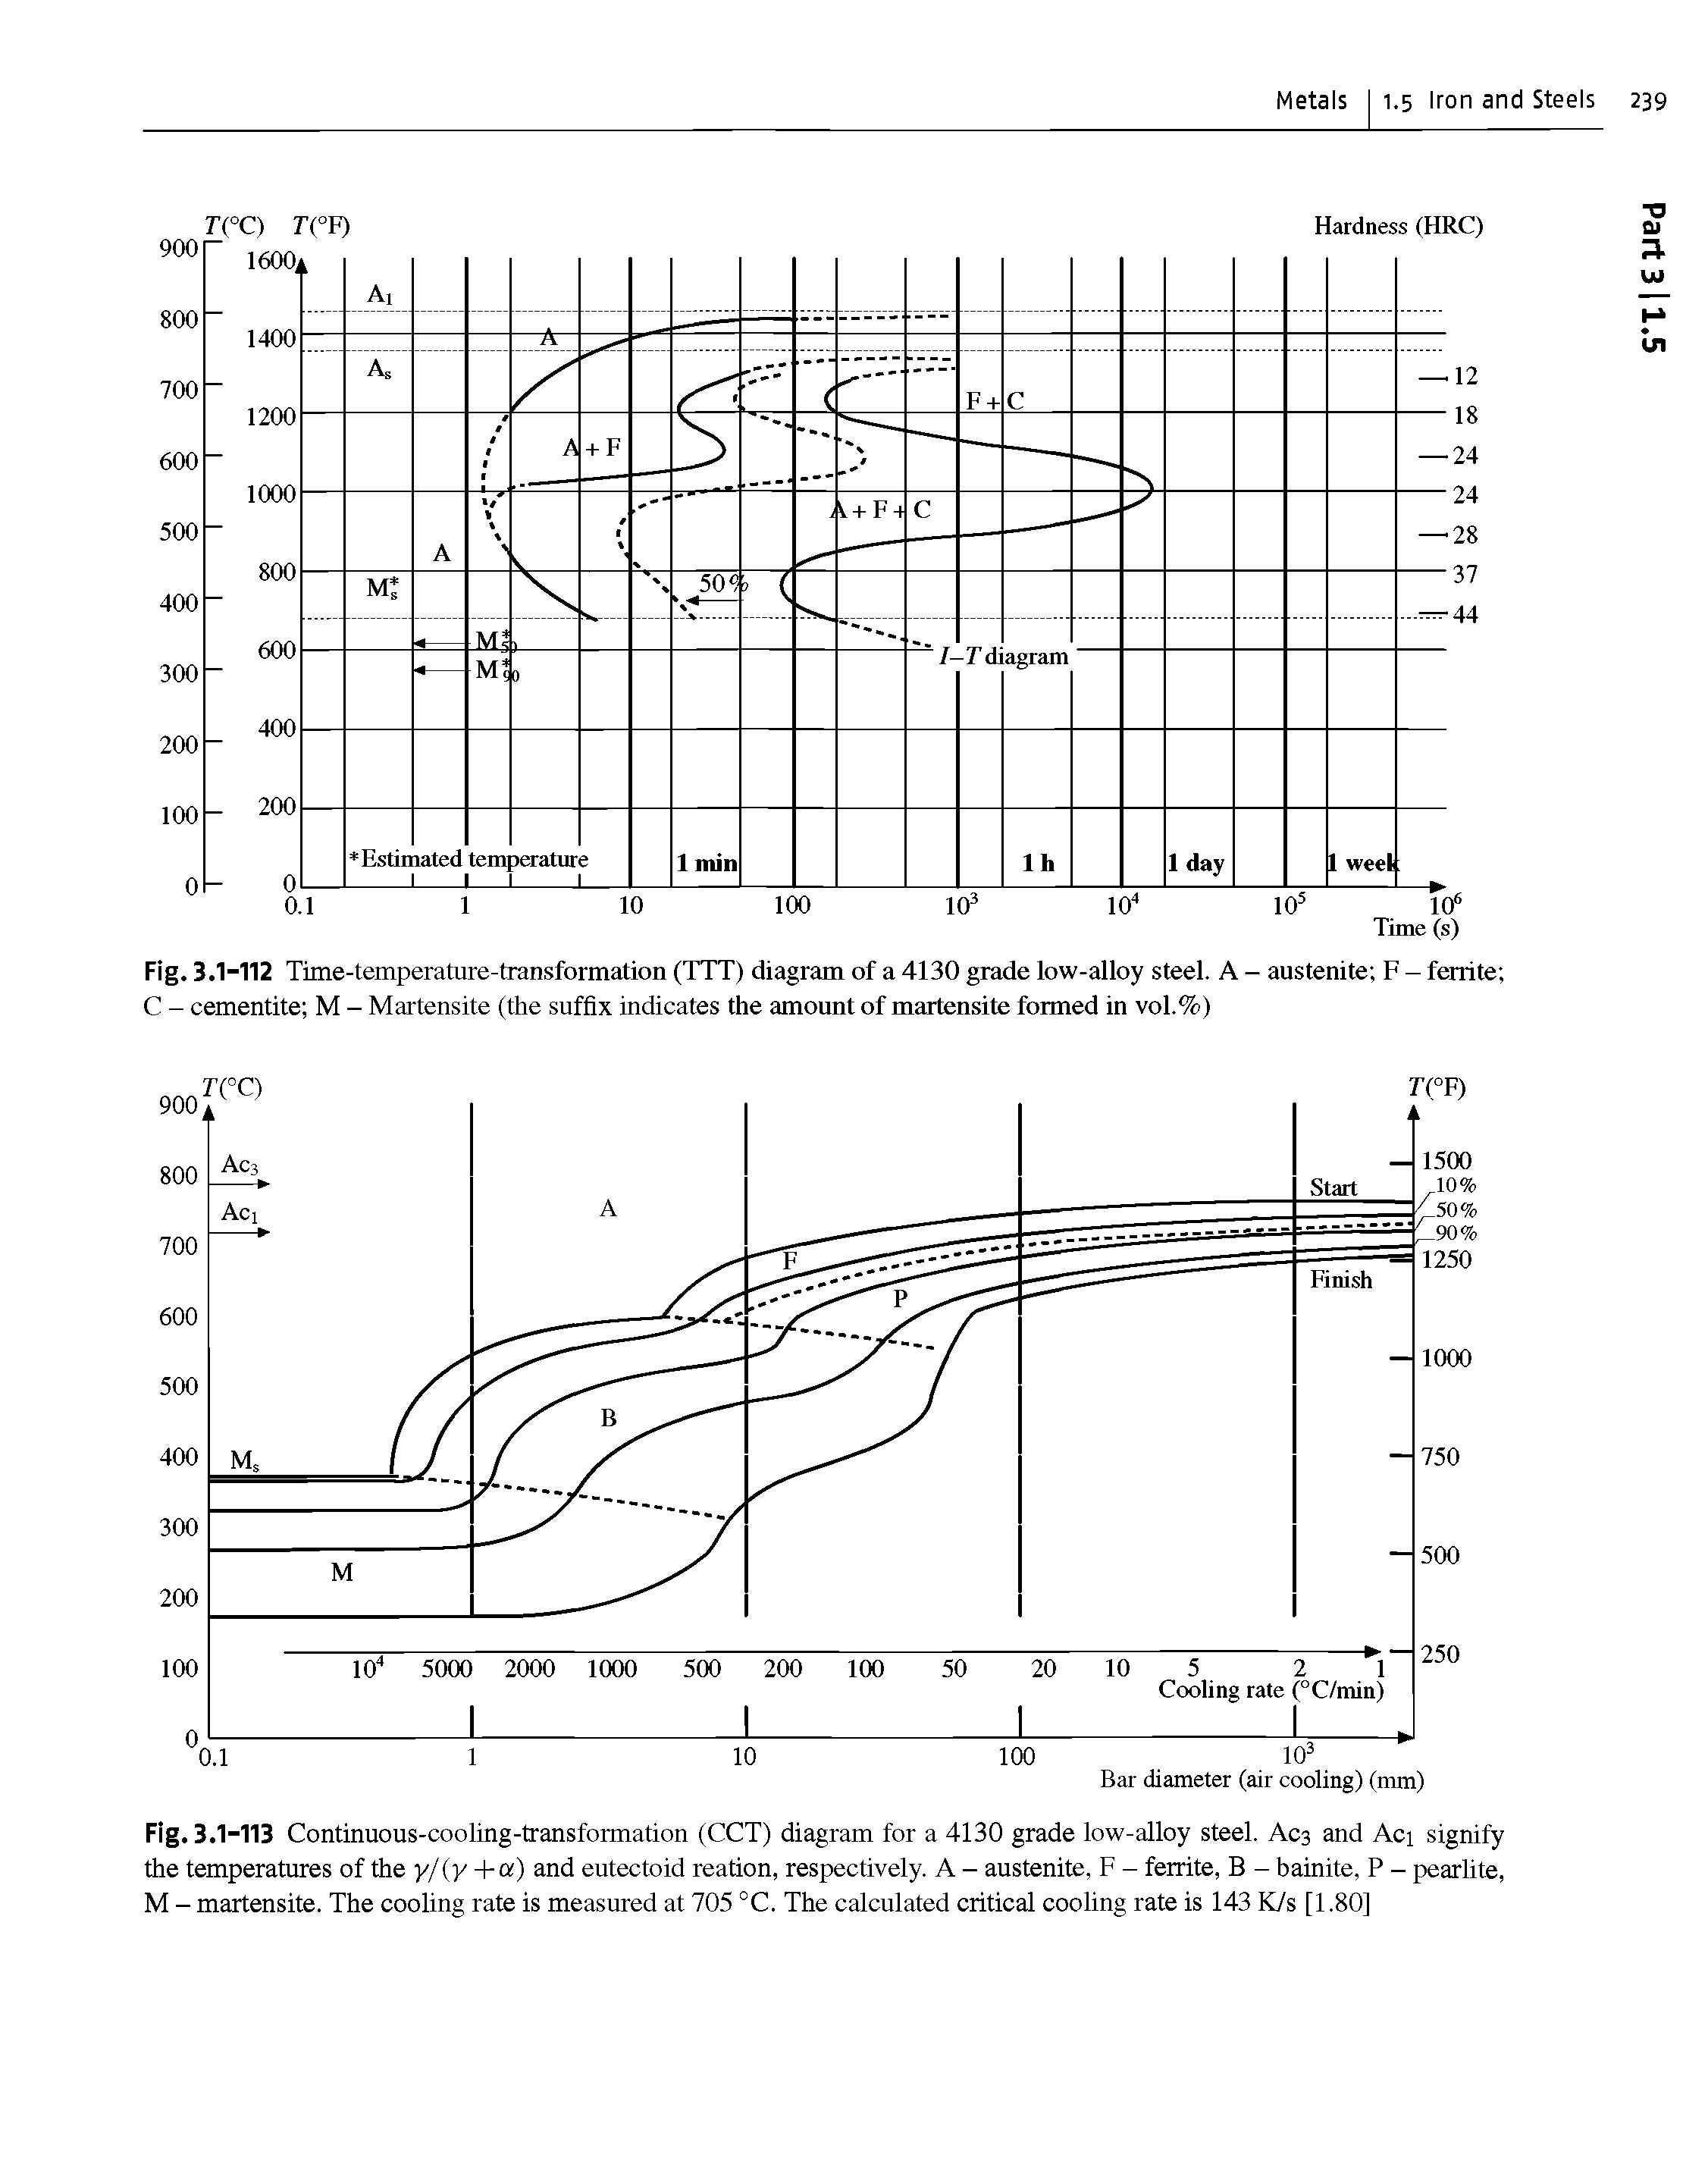 Fig. 3.1-113 Continuous-cooling-transformation (CCT) diagram for a 4130 grade low-alloy steel. Acs and Ac signify the temperatures of the y/ y+a) and eutectoid reation, respectively. A - austenite, F - ferrite, B - bainite, P - pearlite, M - martensite. The cooling rate is measured at 705 °C. The calculated critical cooling rate is 143 K/s [1.80]...